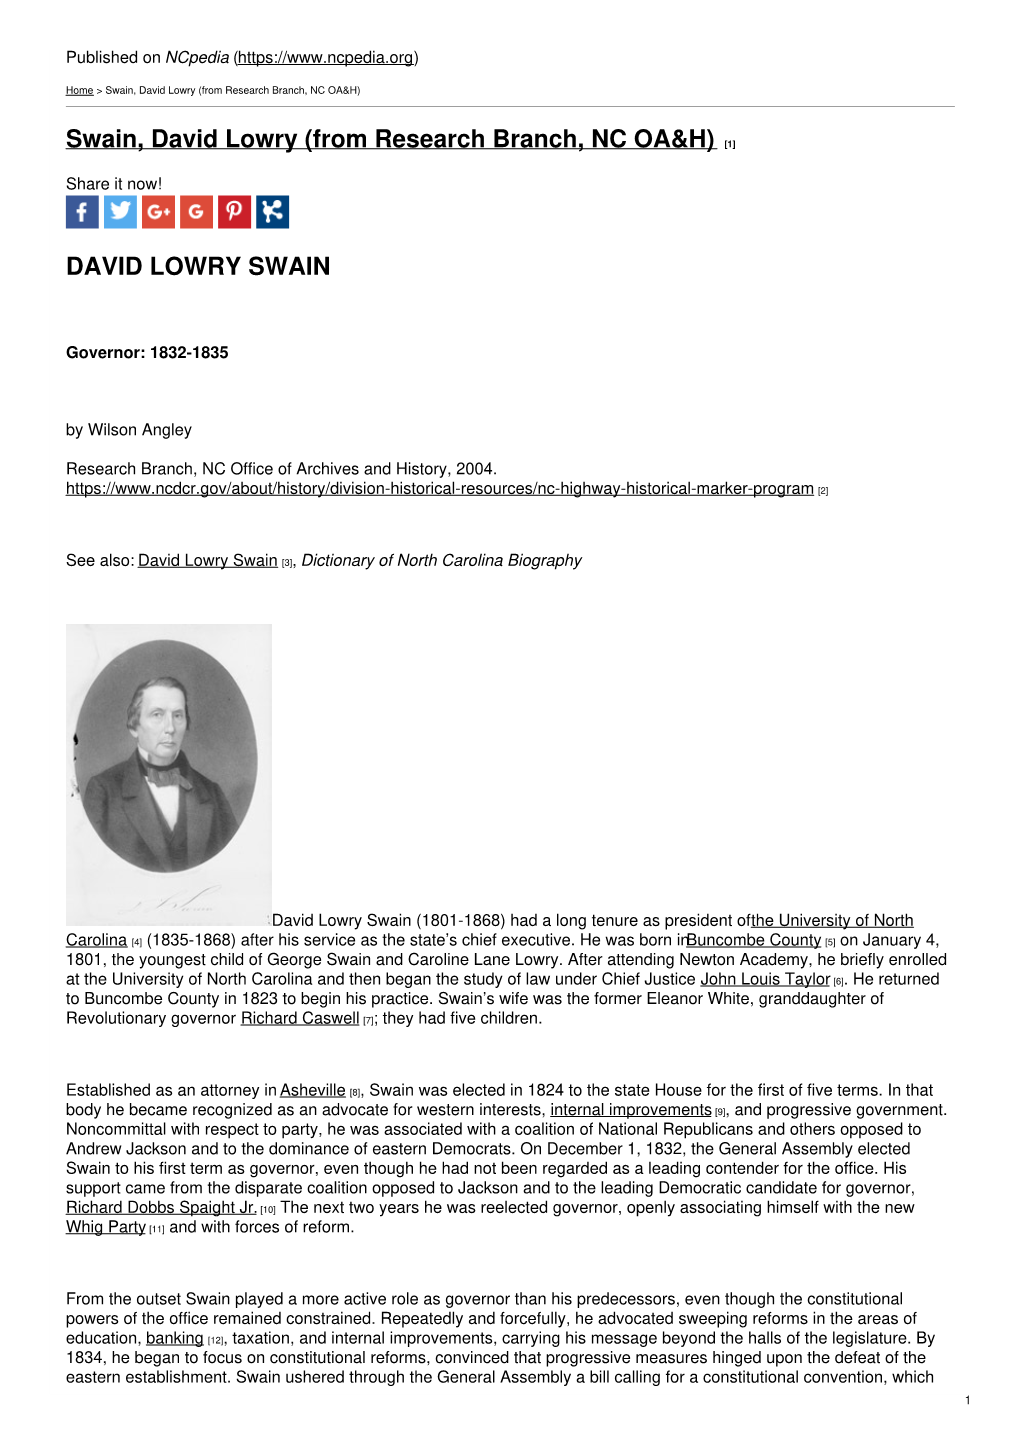 Swain, David Lowry (From Research Branch, NC OA&H)